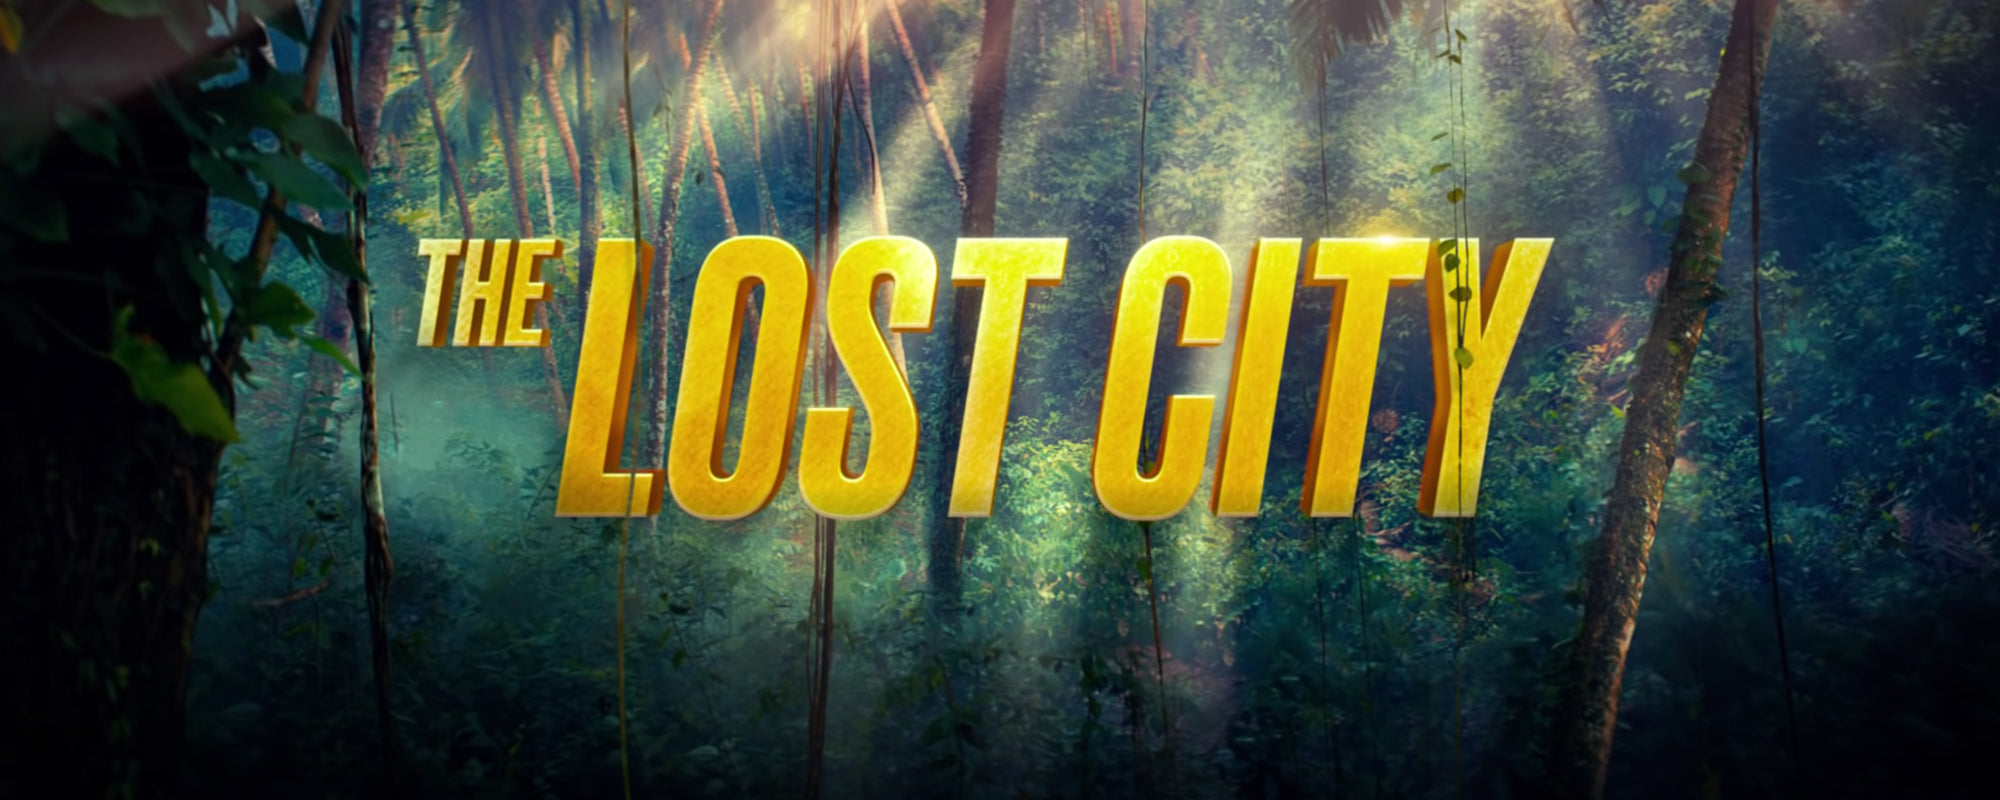 Must see: The Lost City